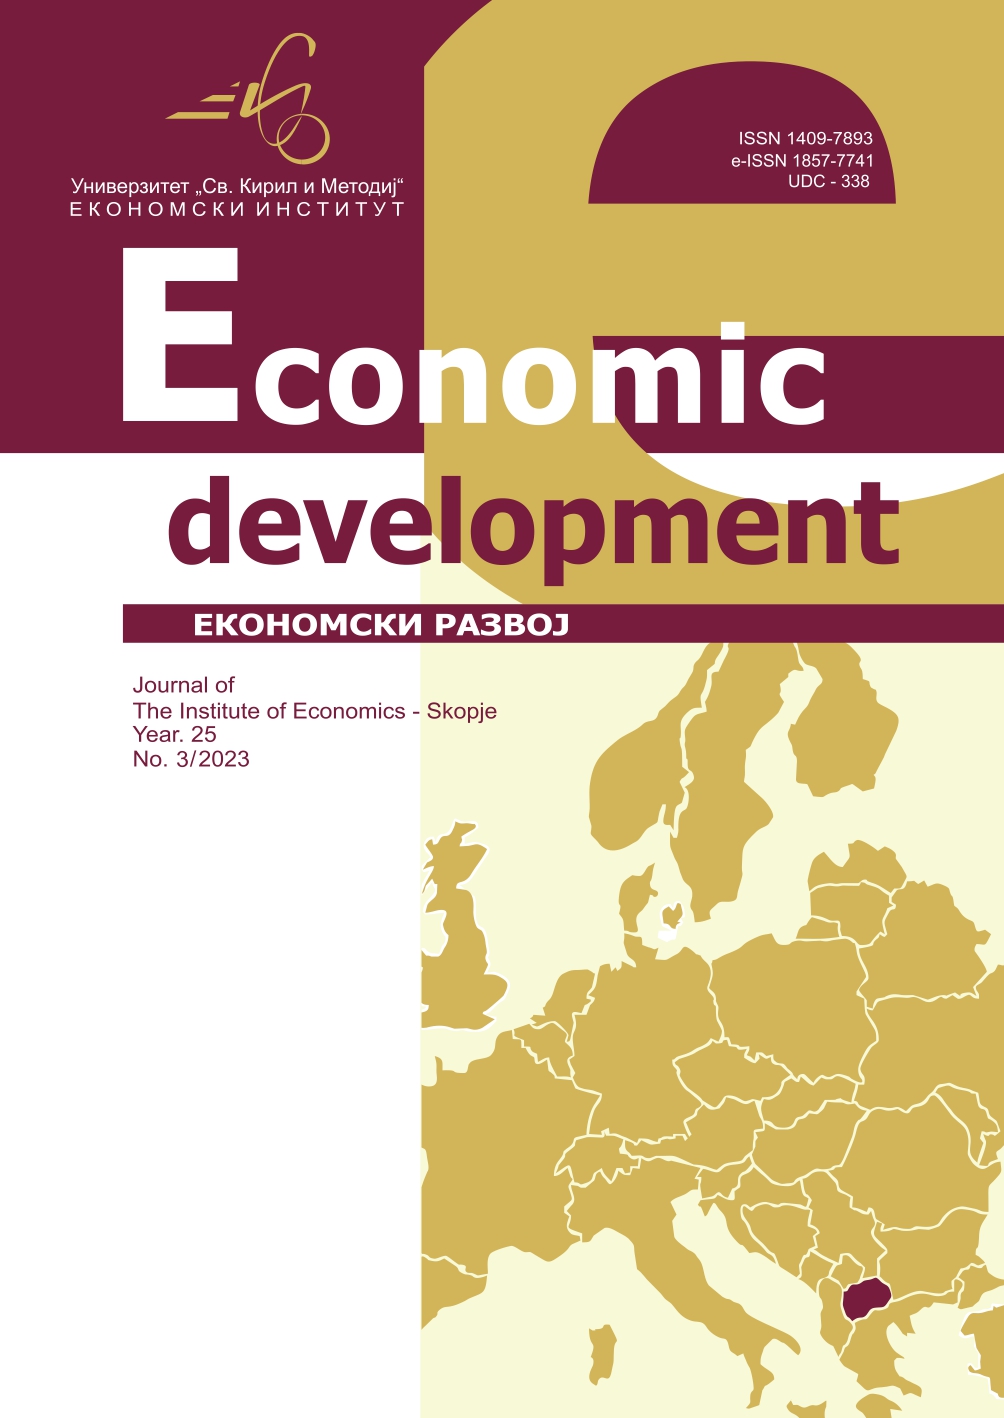 KEY PRINCIPLES OF GOOD GOVERNANCE WITH PUBLIC FINANCES OF THE LOCAL GOVERNMENT IN THE REPUBLIC OF NORTH MACEDONIA